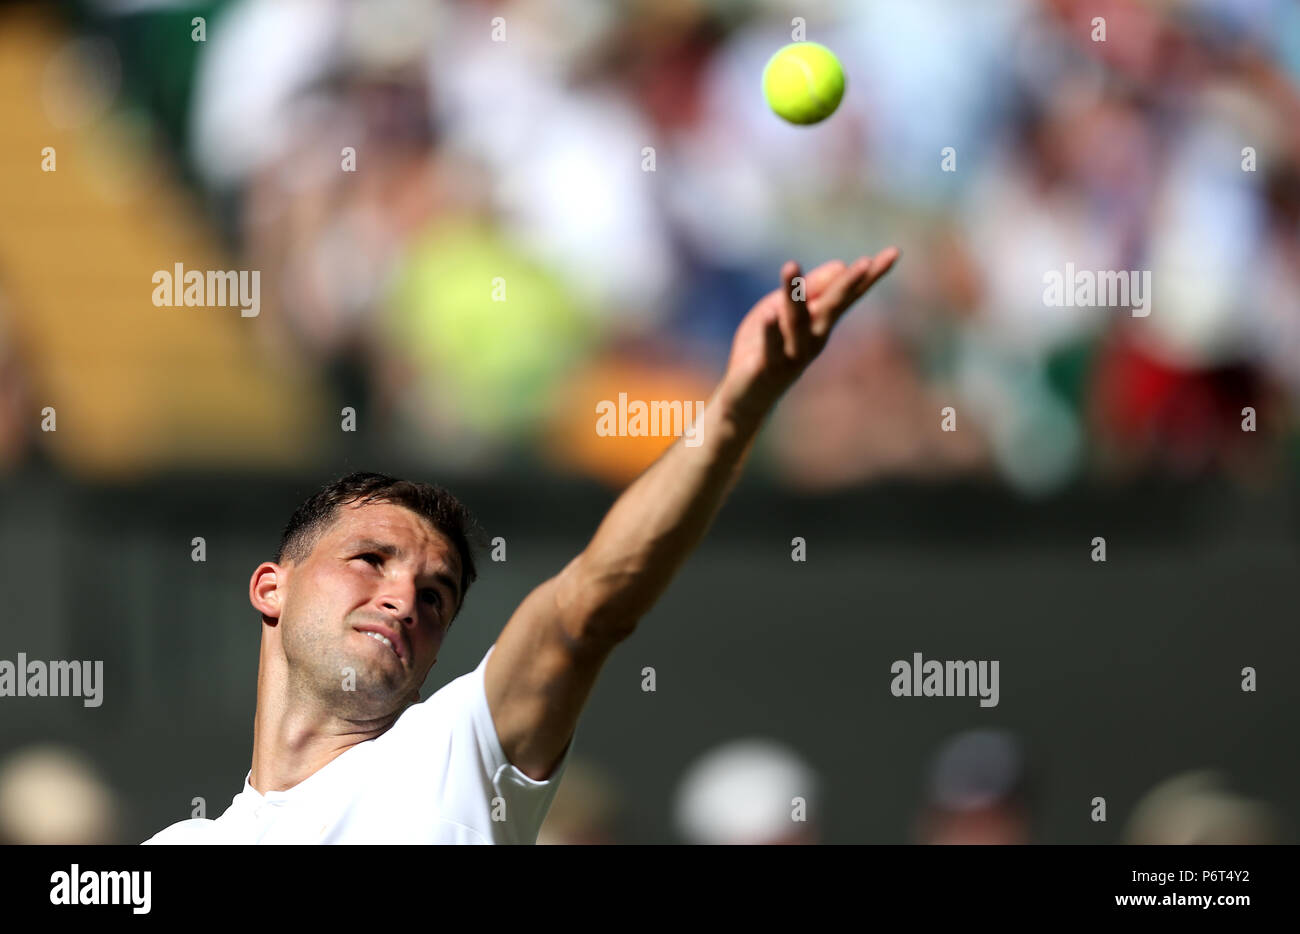 Grigor Dimitrov on day One of the Wimbledon Championships at the All England Lawn Tennis and Croquet Club, Wimbledon. Stock Photo